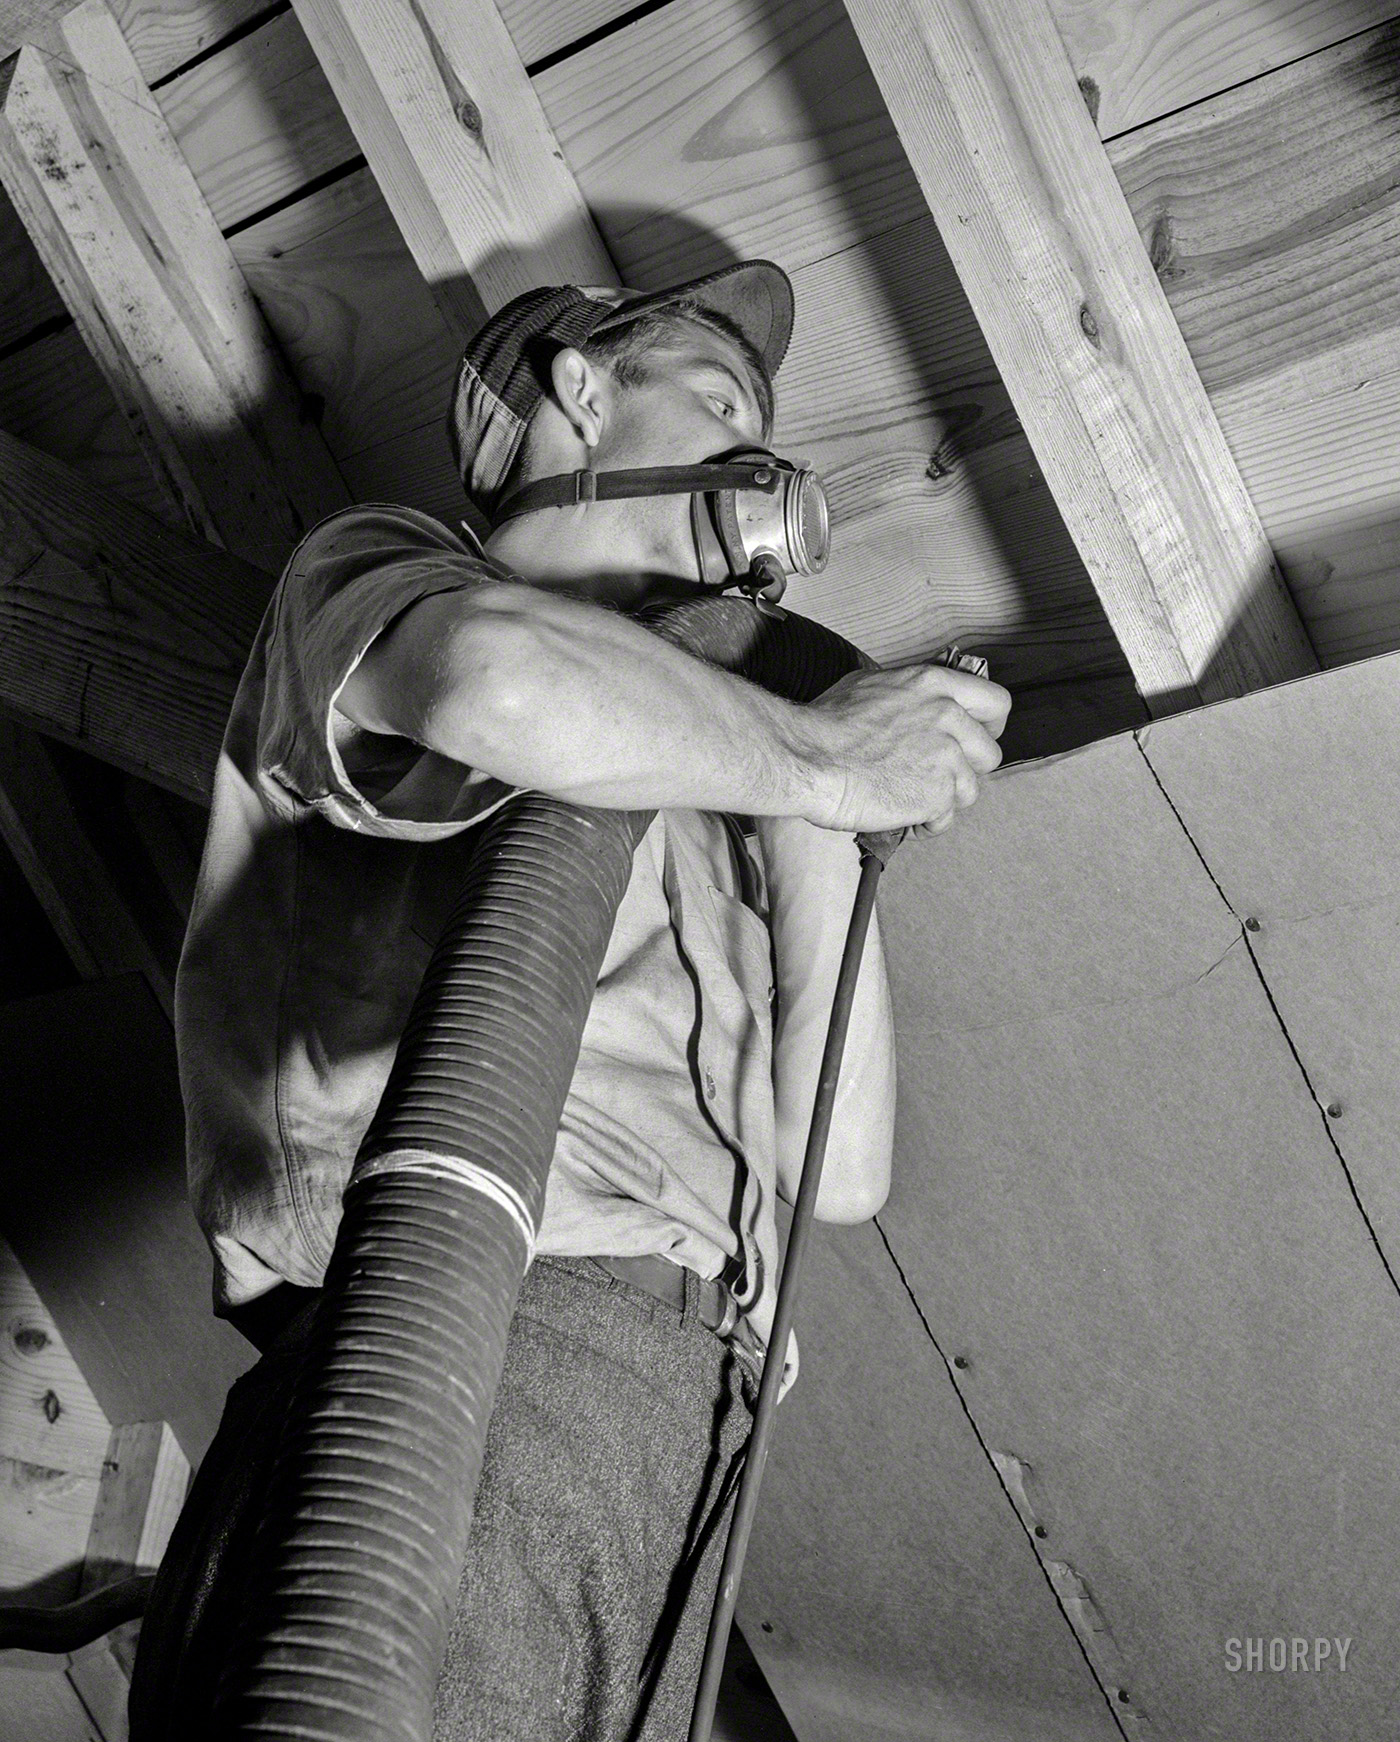 Washington, D.C., circa 1942. "Conservation of fuel oil -- rock-wool attic insulation." Office of War Information photo. View full size.